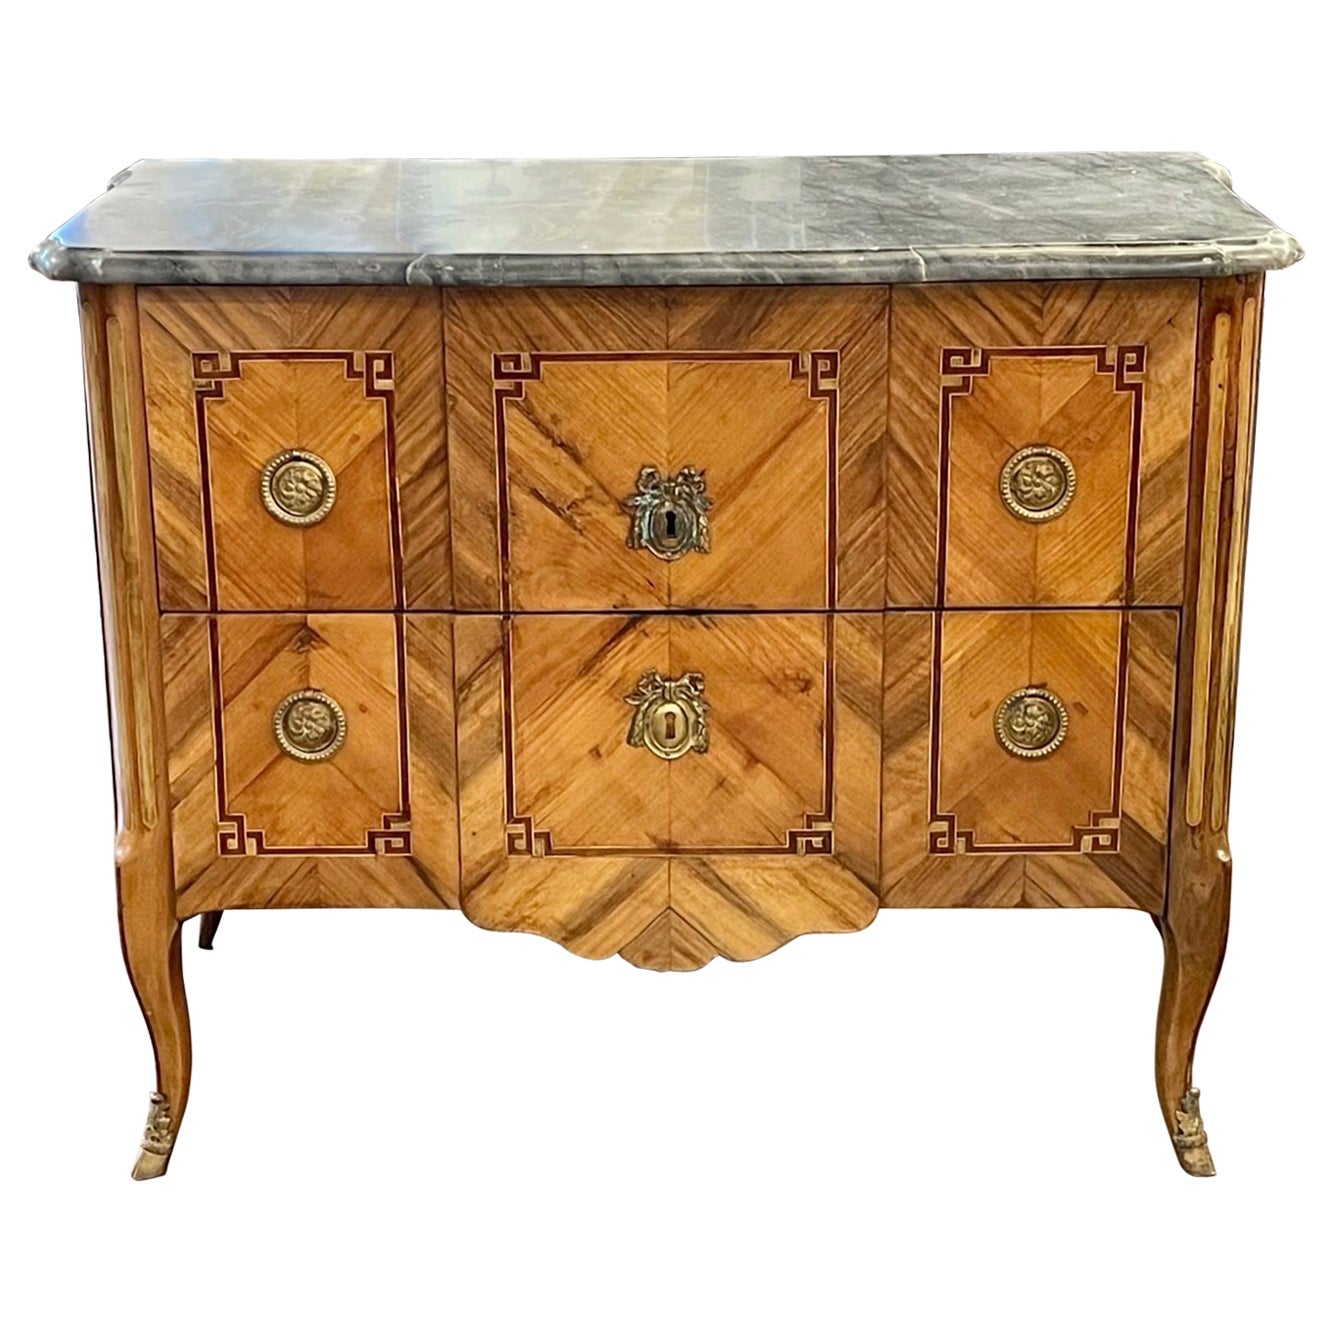 18th Century French Transitional Inlaid Walnut Commode